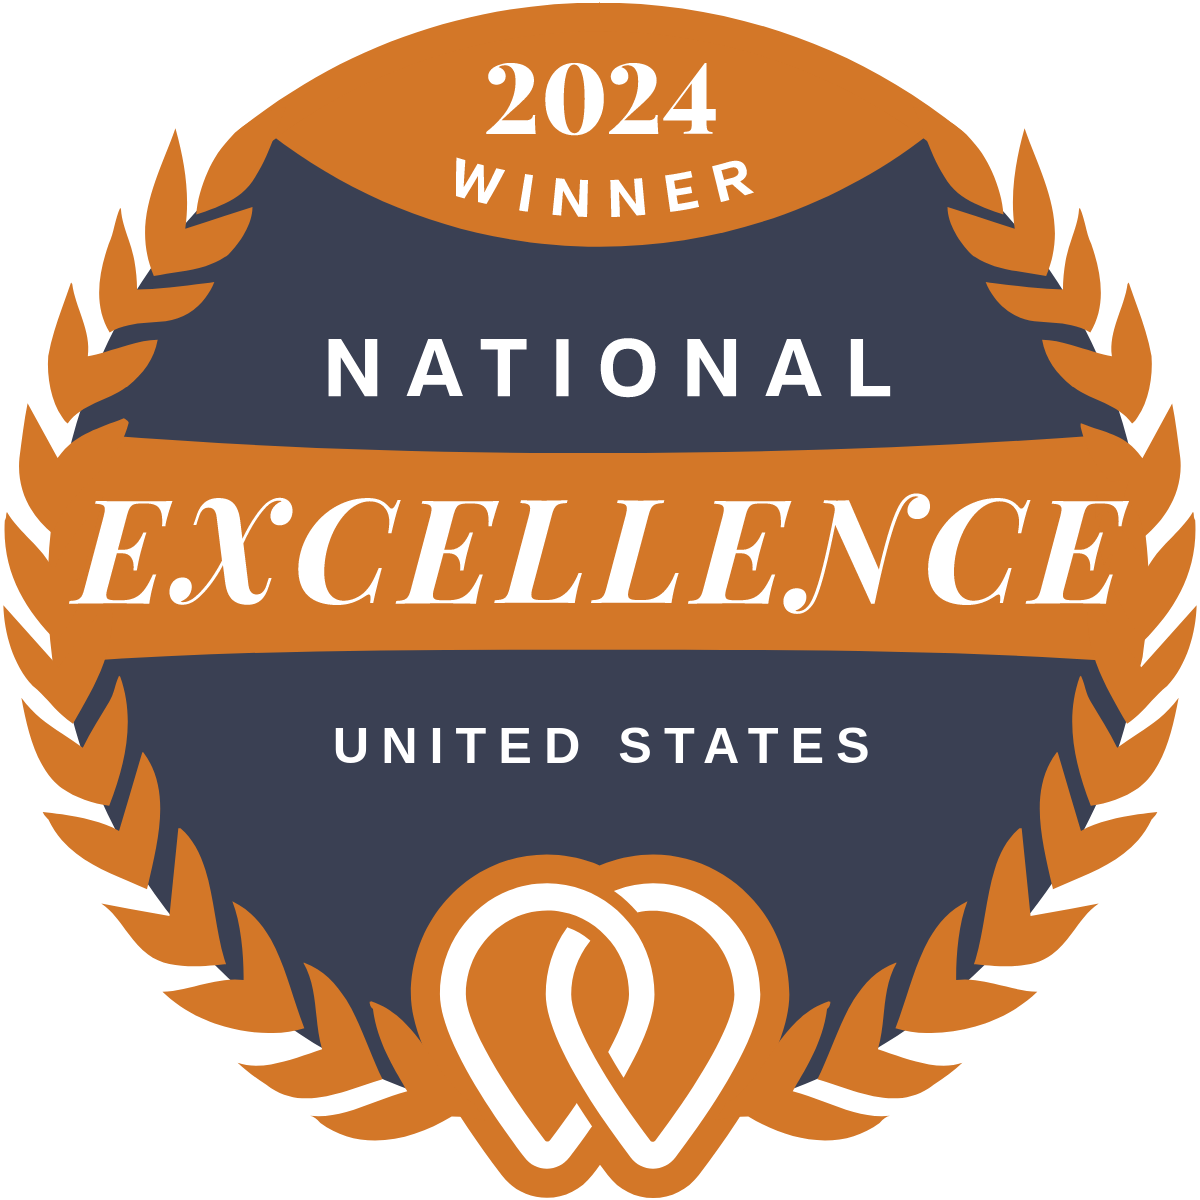 2024 national excellence upcity award